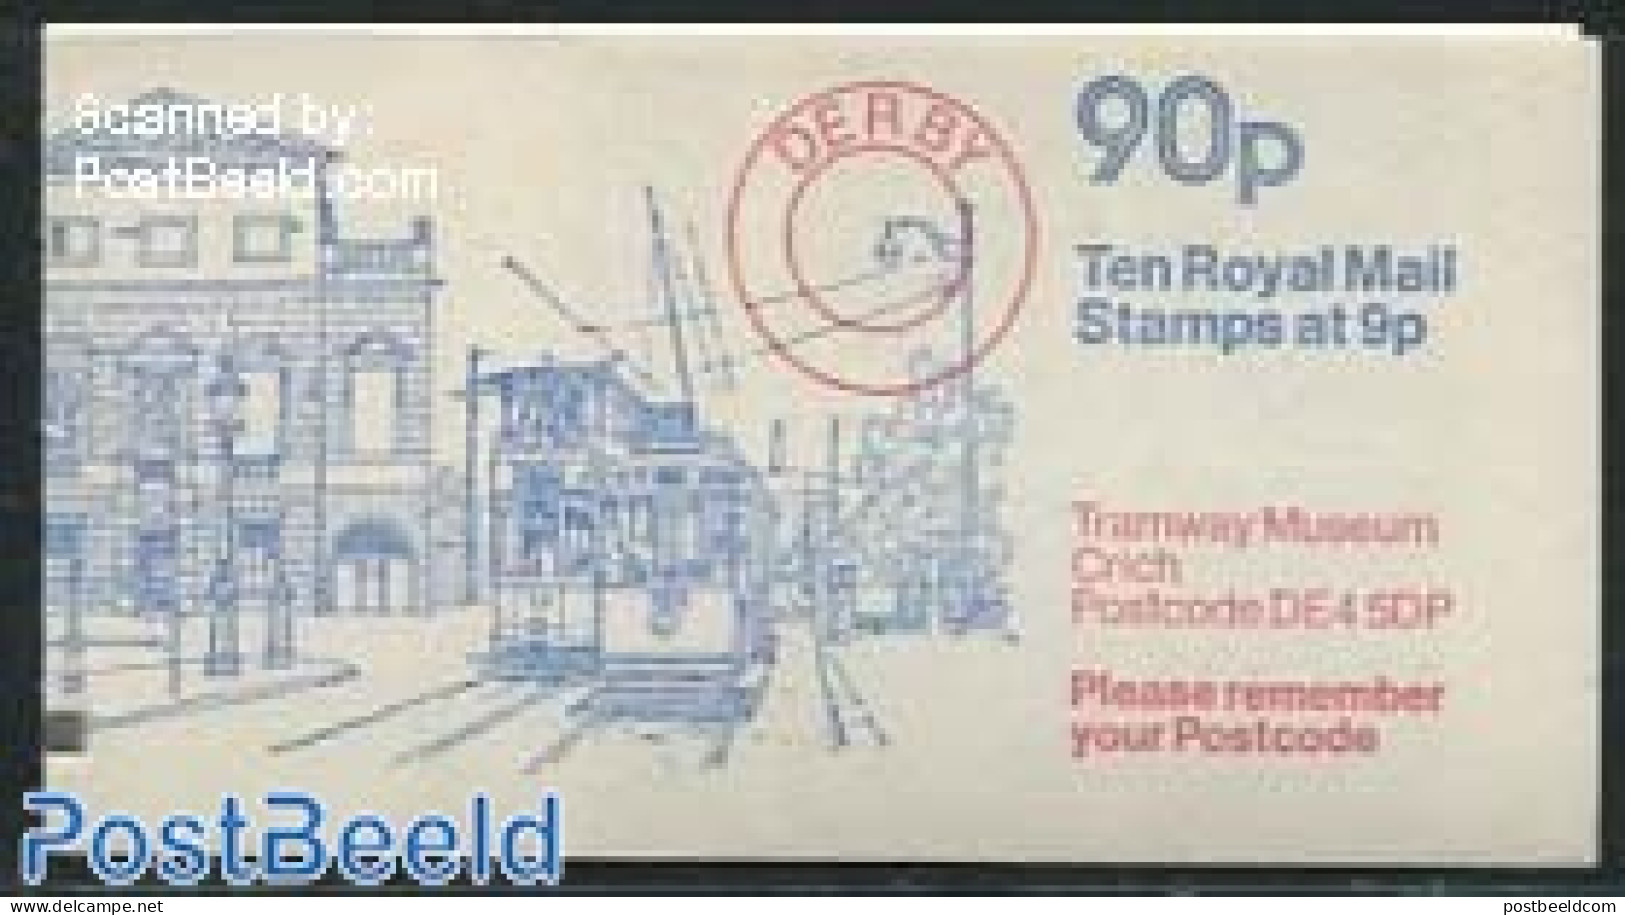 Great Britain 1979 Definitives Booklet, Tramway Museum, Selvedge At Left, Mint NH, Transport - Stamp Booklets - Trams - Nuovi